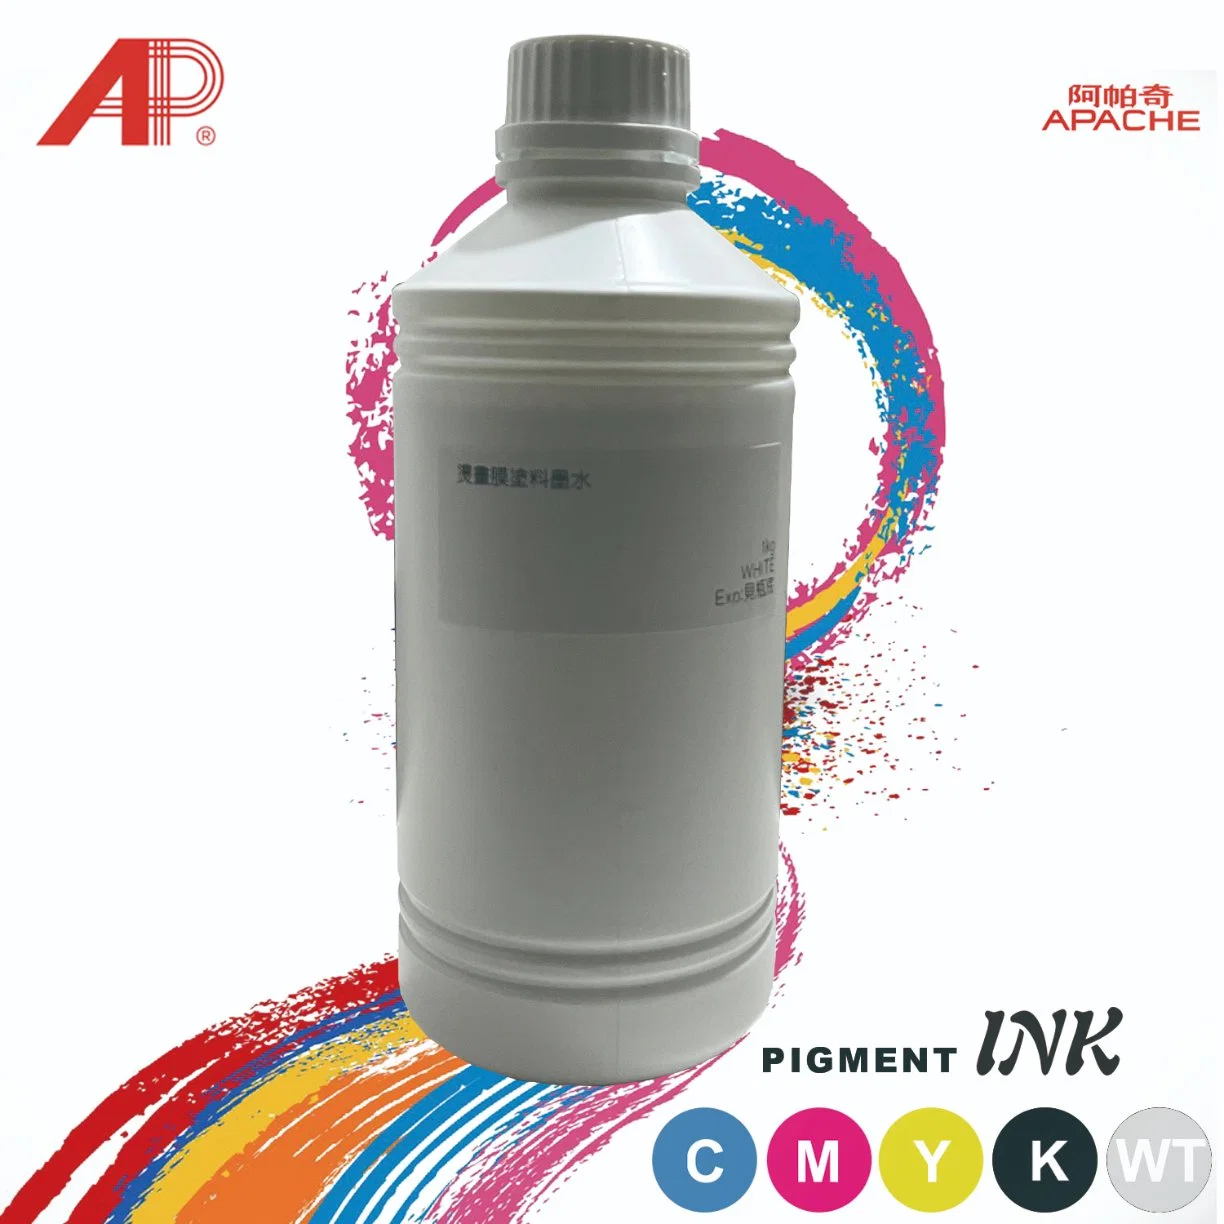 Manufacturer 5 Colors 1000ml Water Based Dtf Pigment Ink for EPS XP600